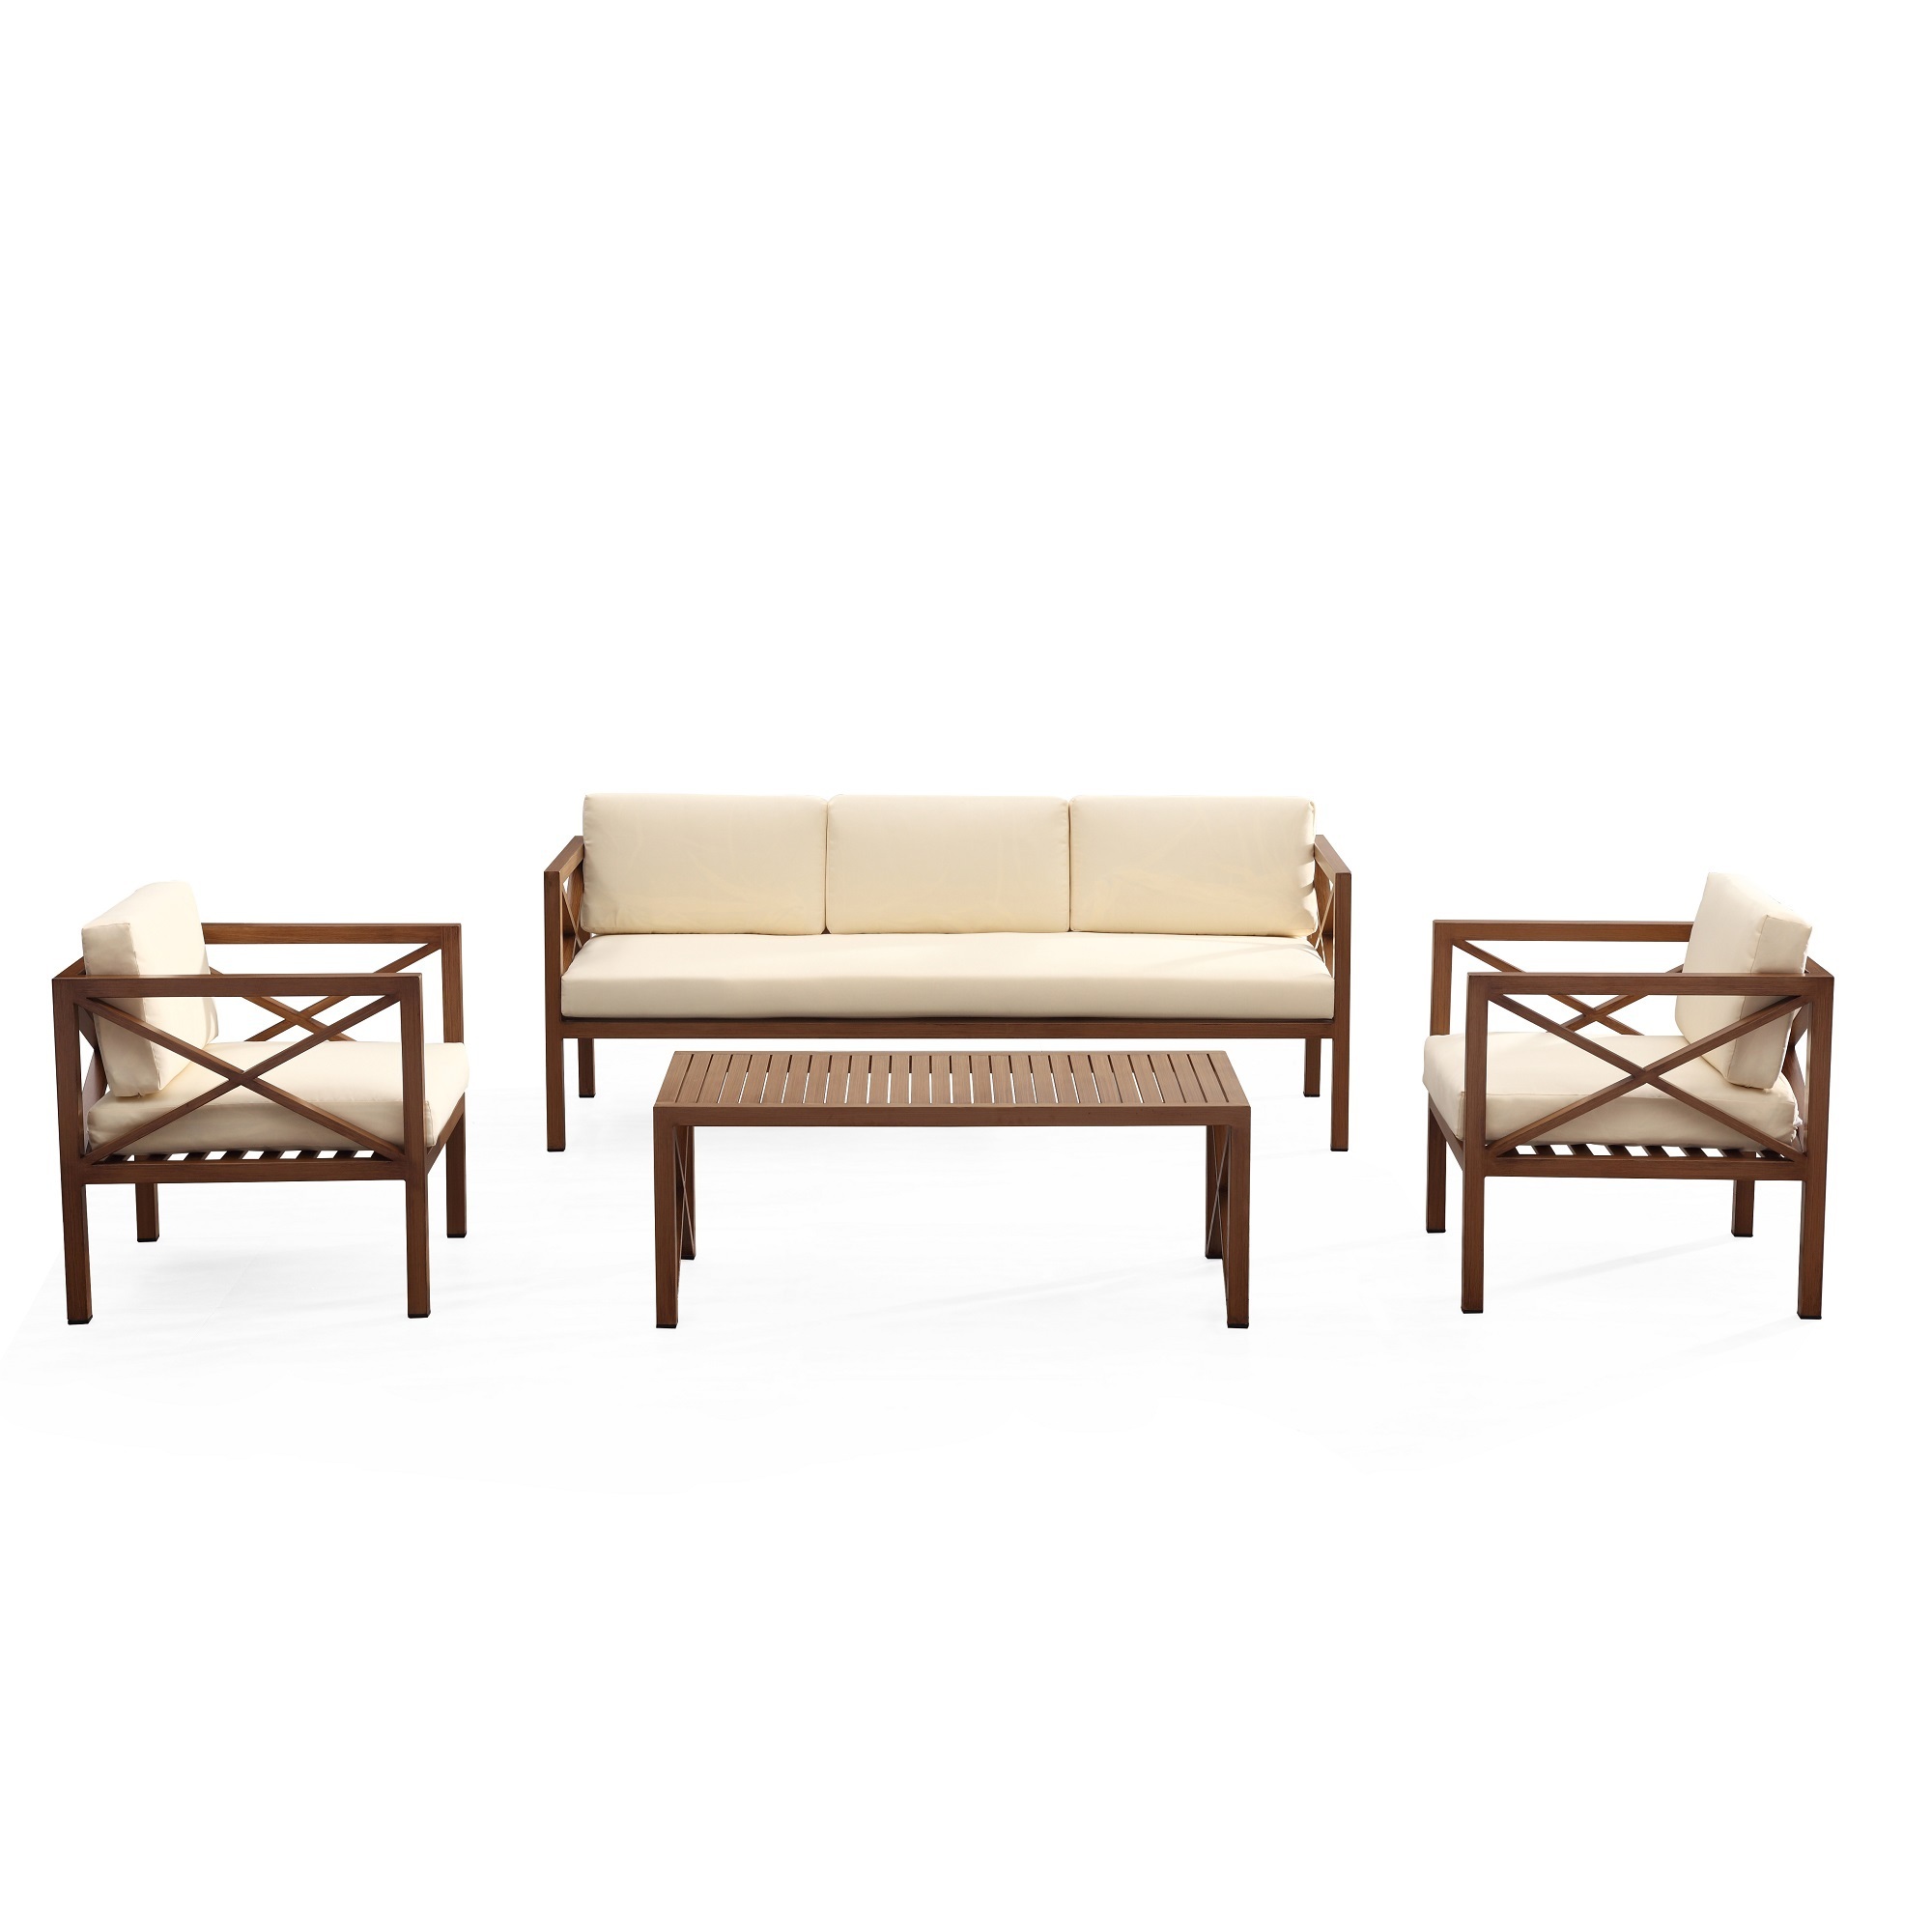 Manhattan Comfort, Kingsbay Outdoor Patio Conv Set in Brown and Cream, Pieces (qty.) 4 Primary Color Cream, Seating Capacity 5 Model OD-CV014